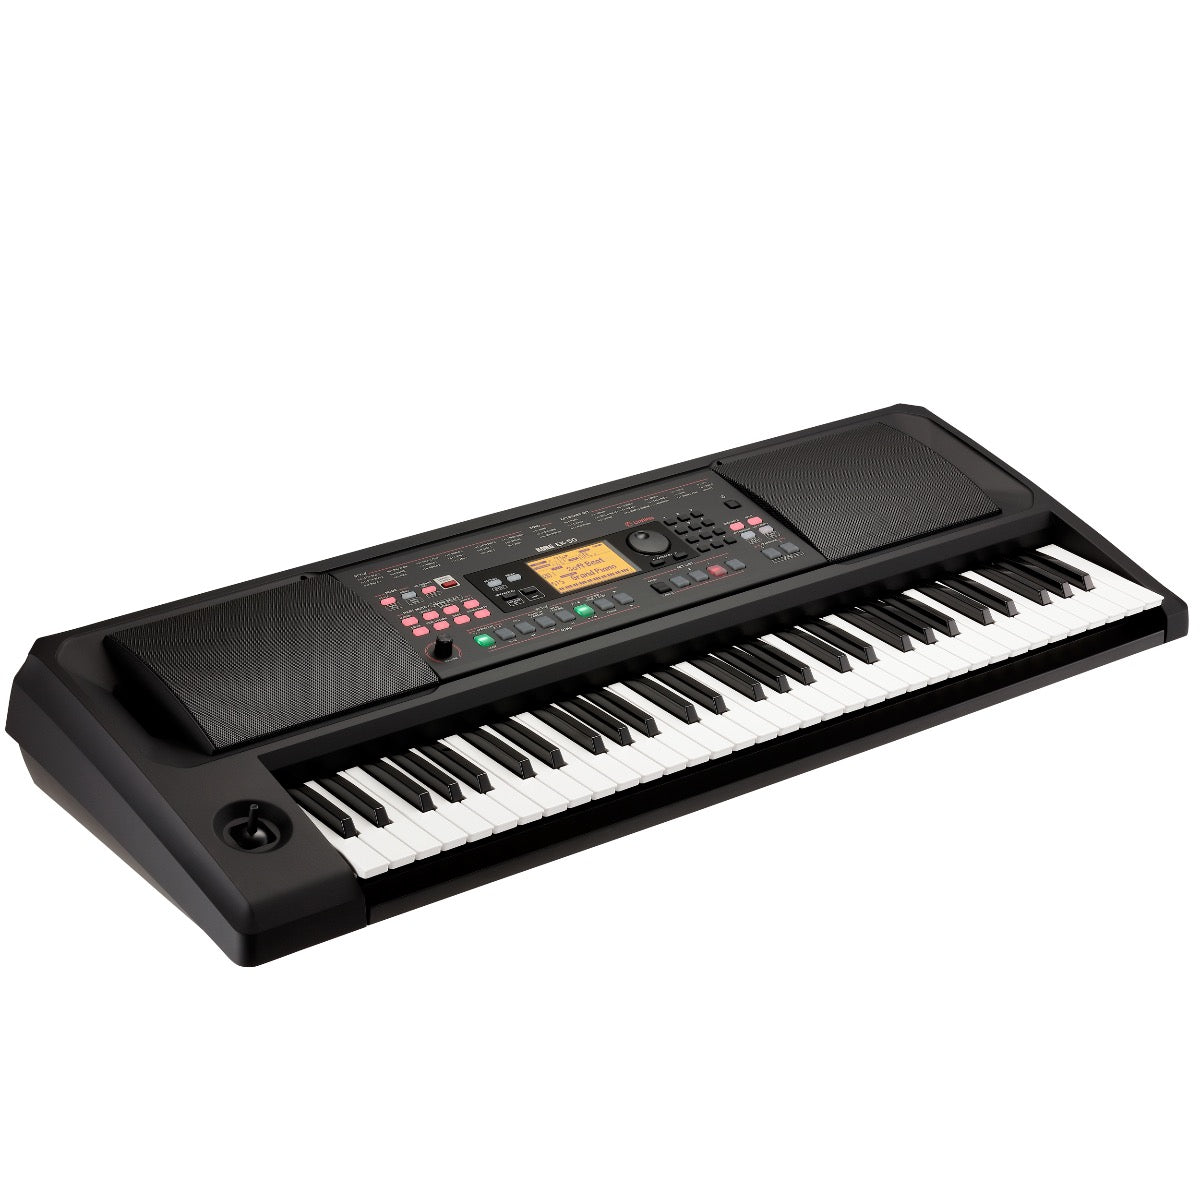 Right 3/4 view of Korg EK-50 L Entertainer Keyboard showing top, front edge and left edge